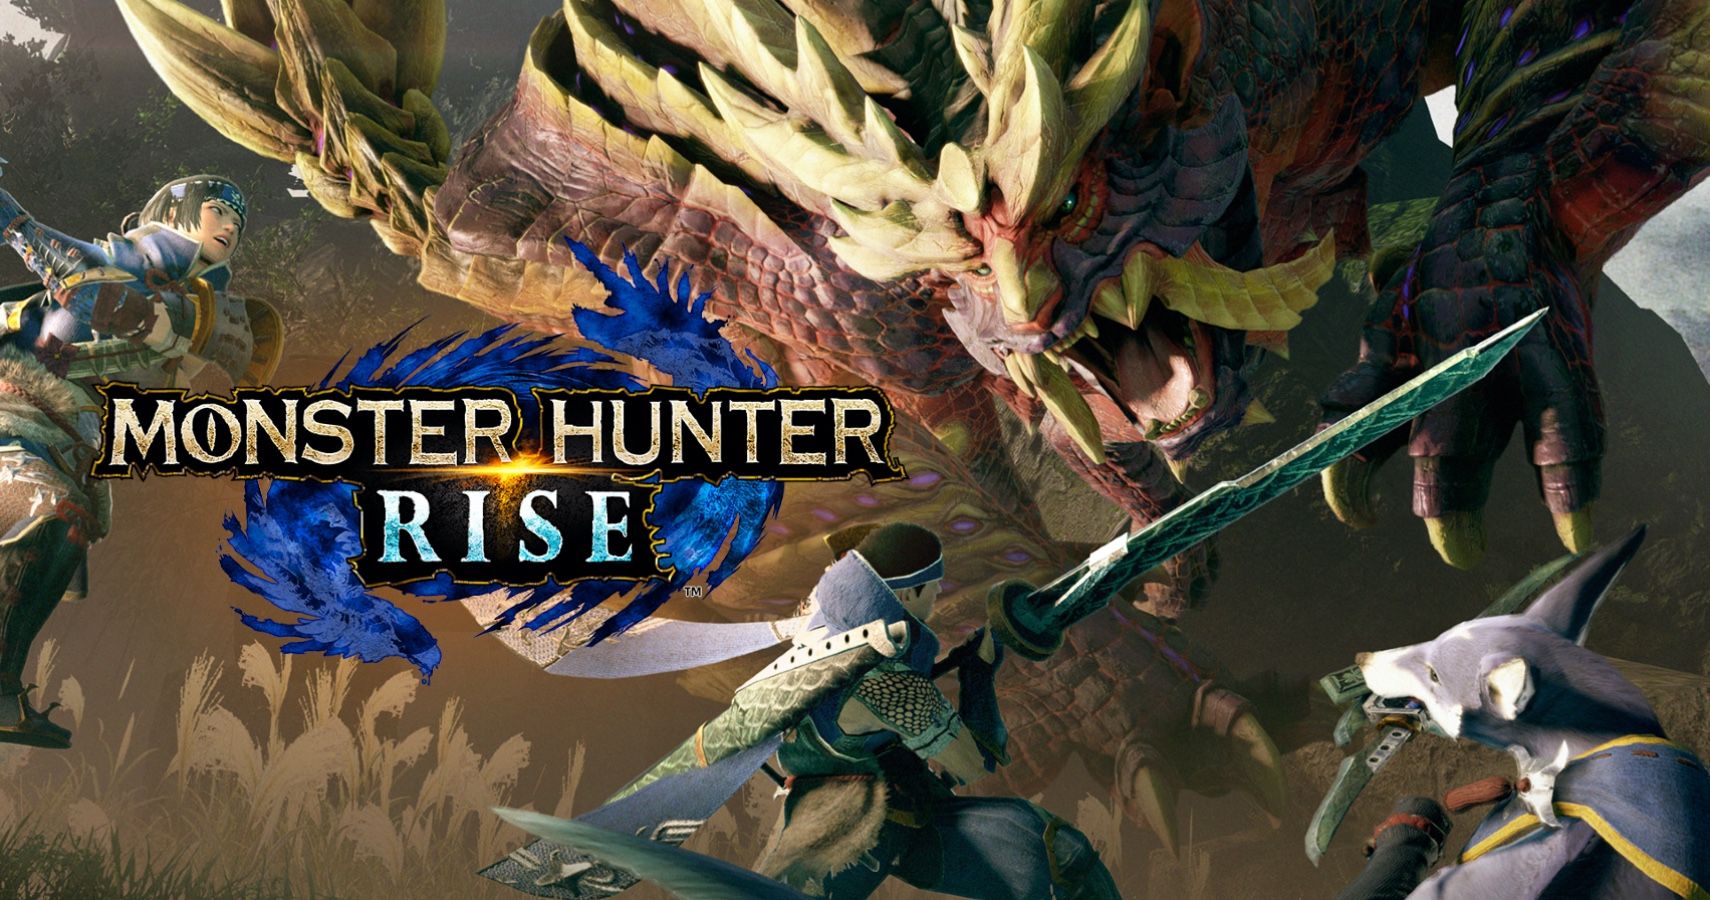 How to Unlock the New Monster Hunter Rise 2.0 Monsters - Hey Poor